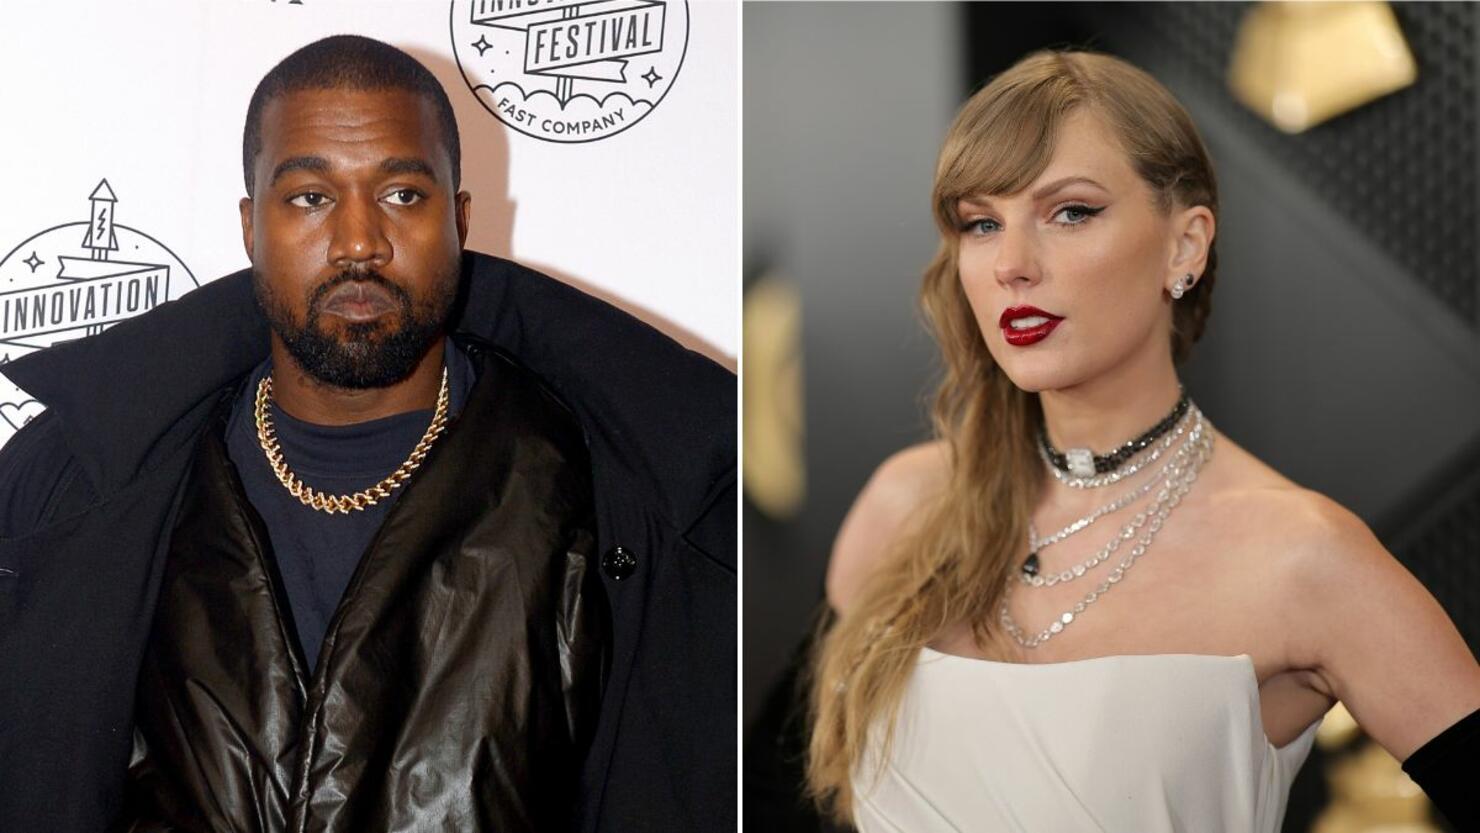 How Taylor Swift Responded To Being Named In Kanye West's New Song | iHeart